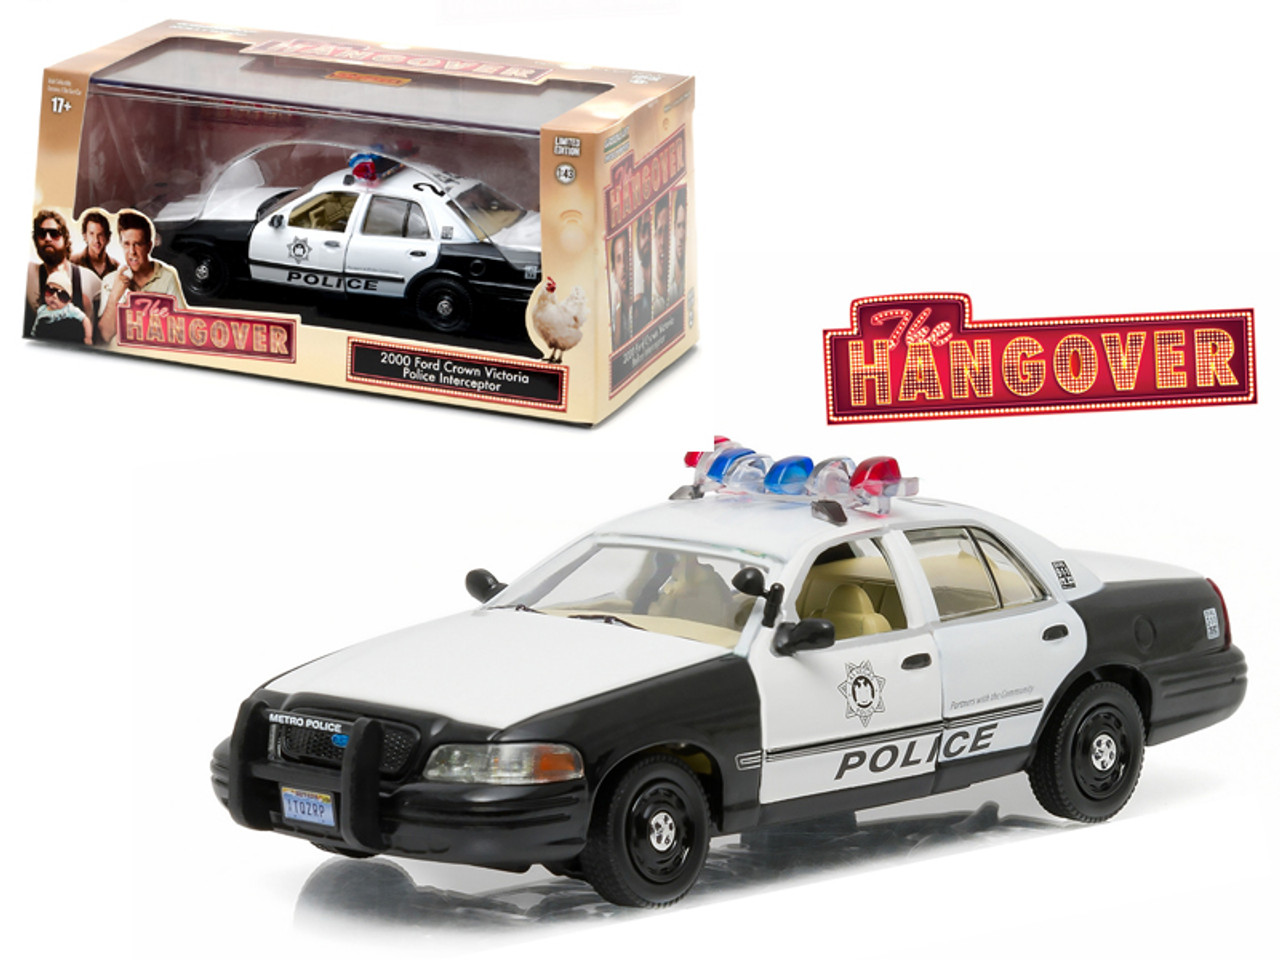 2000 Ford Crown Victoria Police Interceptor "The Hangover" (2009) Movie 1/43 Diecast Model Car by Greenlight